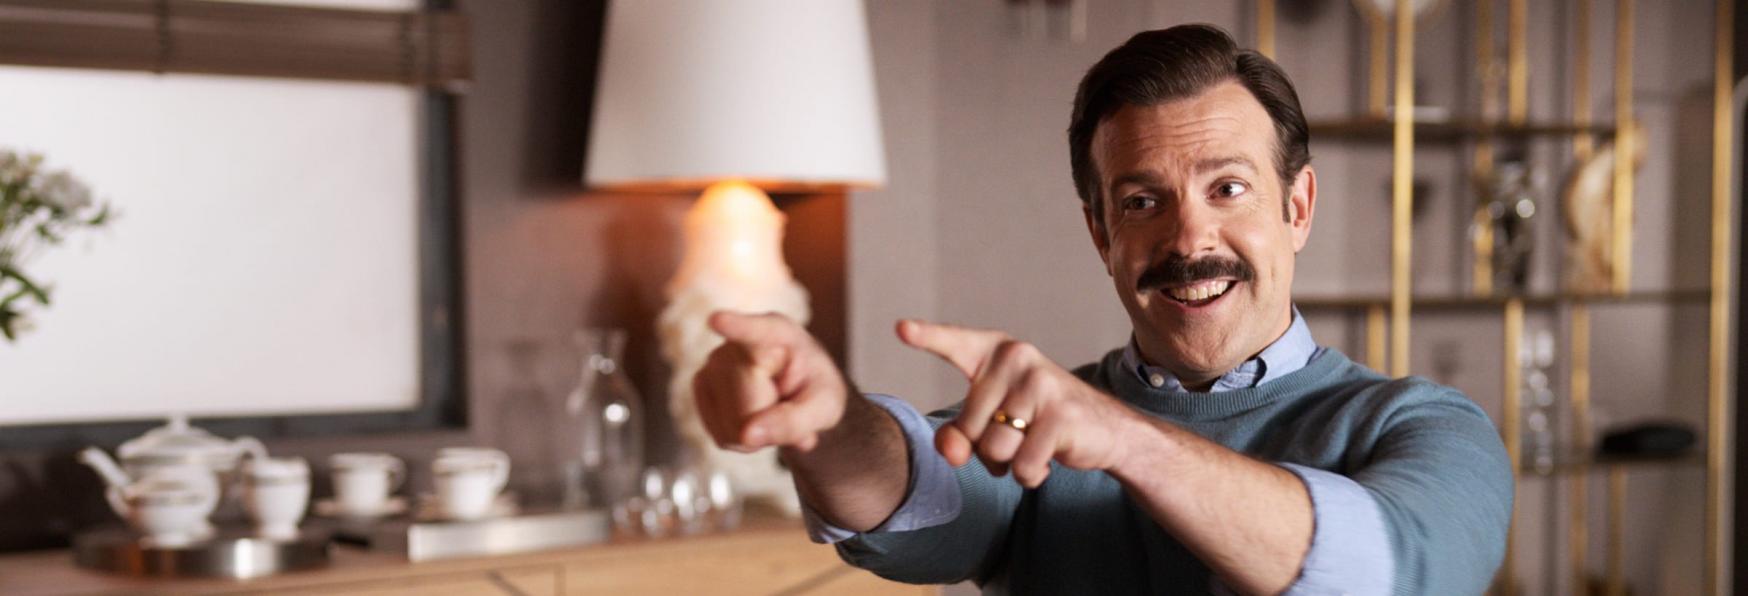 Ted Lasso 3: The New Season gets a Great Score on Rotten Tomatoes